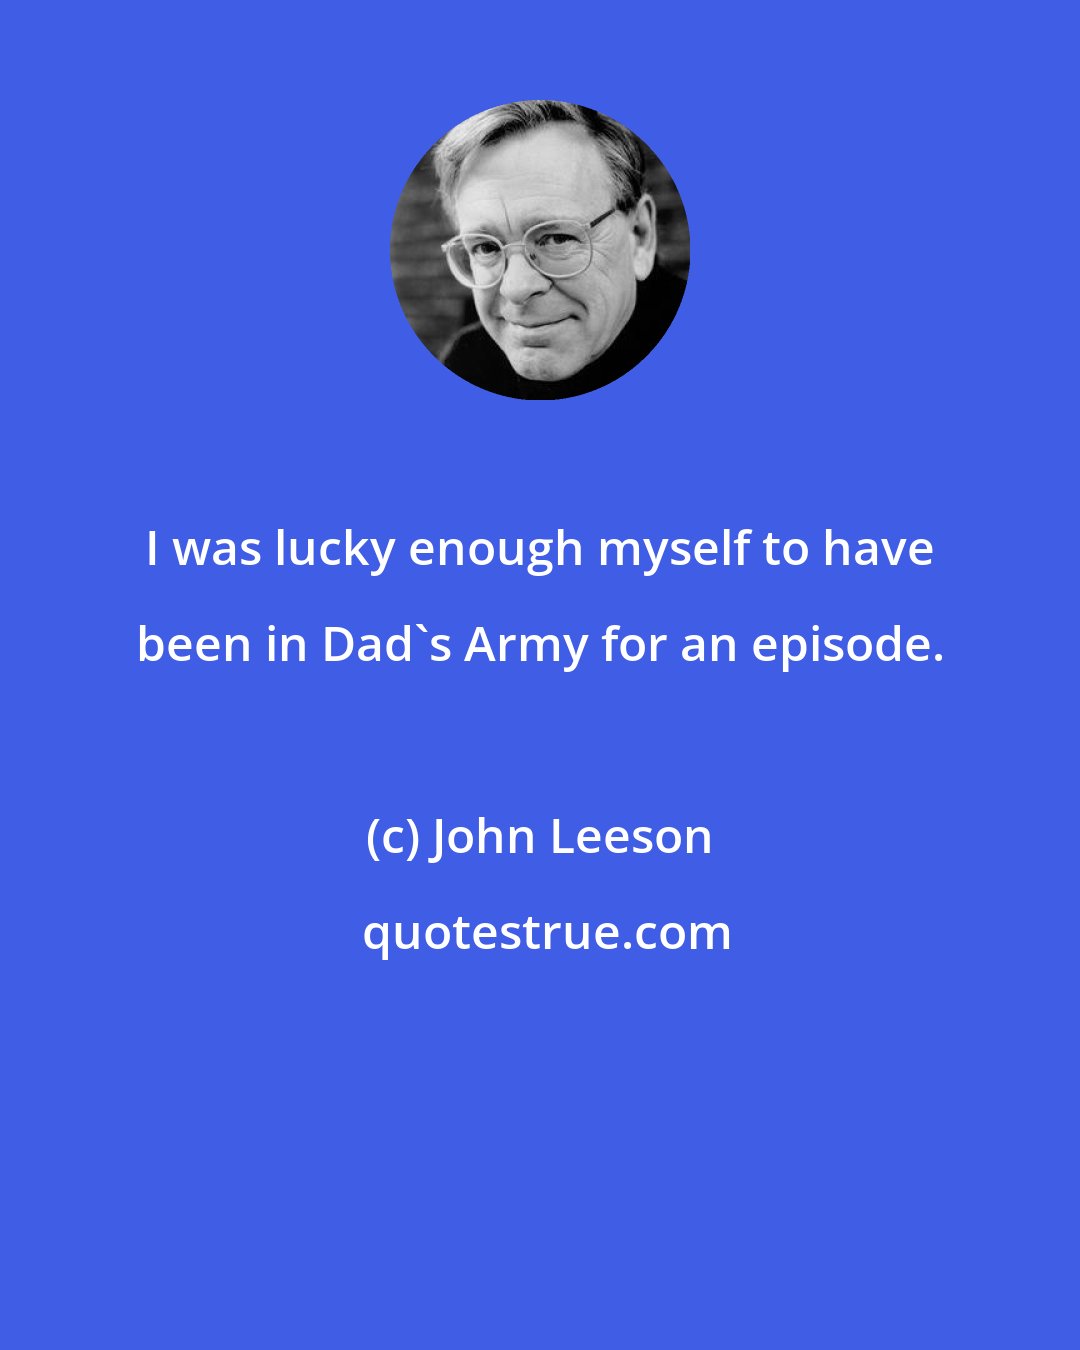 John Leeson: I was lucky enough myself to have been in Dad's Army for an episode.